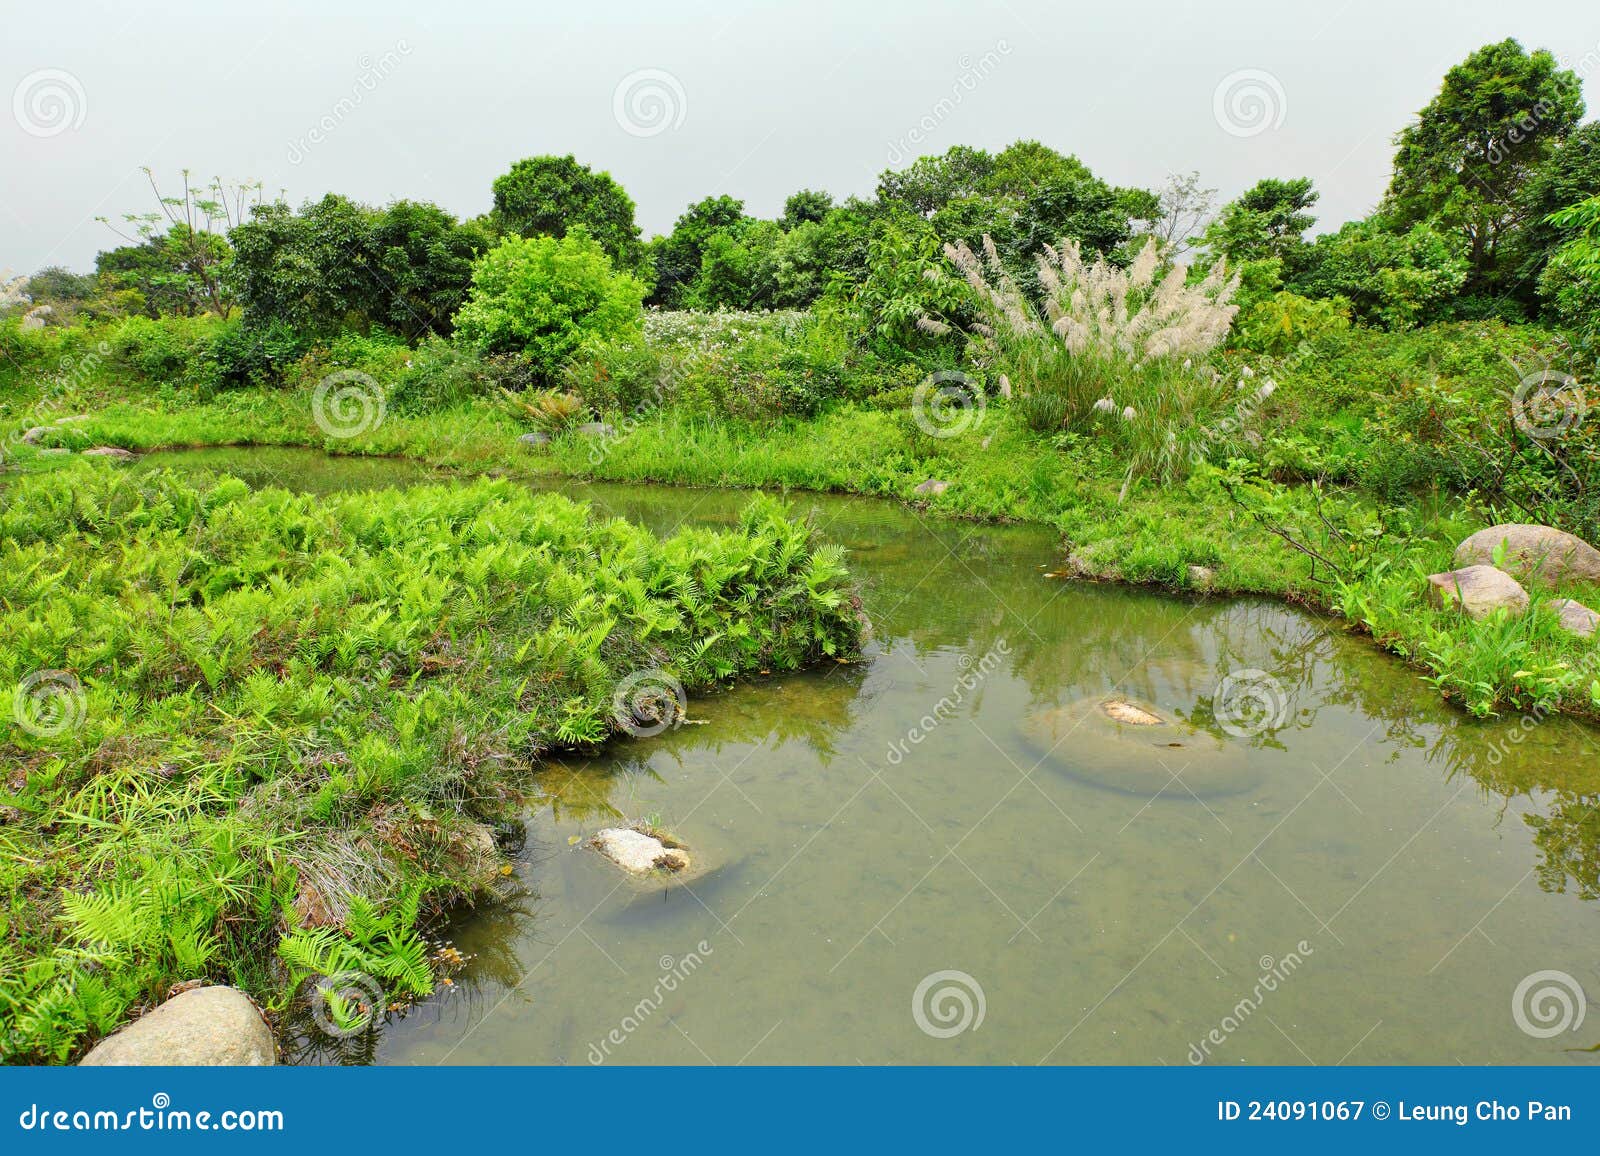 Wetland stock image. Image of asia, pond, park, area - 24091067